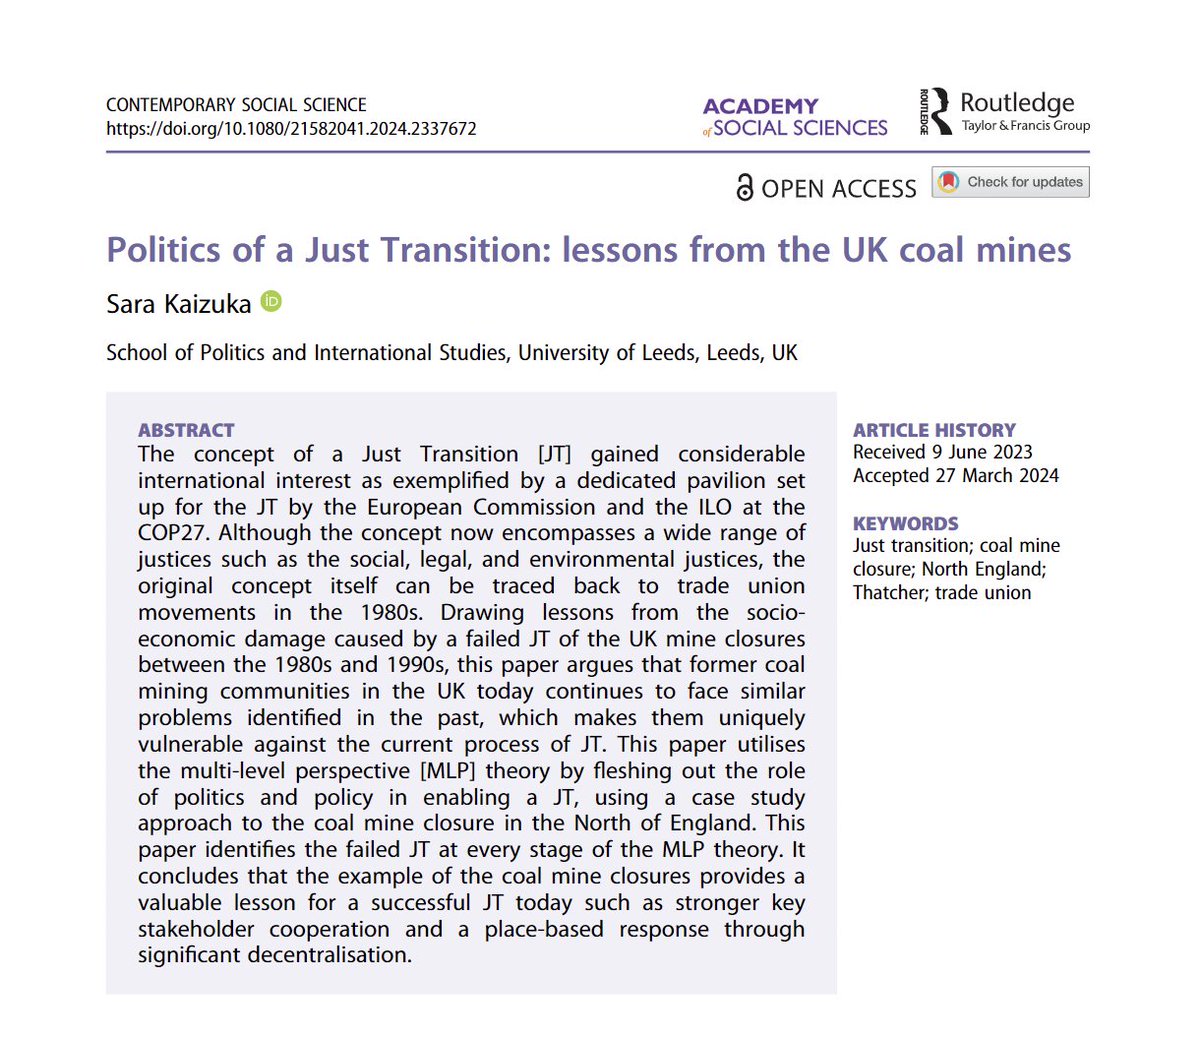 Delighted to learn that my first publication from my #PhD project has just been published at @cssjournal1 The paper applies the multi-level perspective theory in analysing how the transition away from coal resulted in an unjust transition in the UK 👇 tandfonline.com/doi/full/10.10…